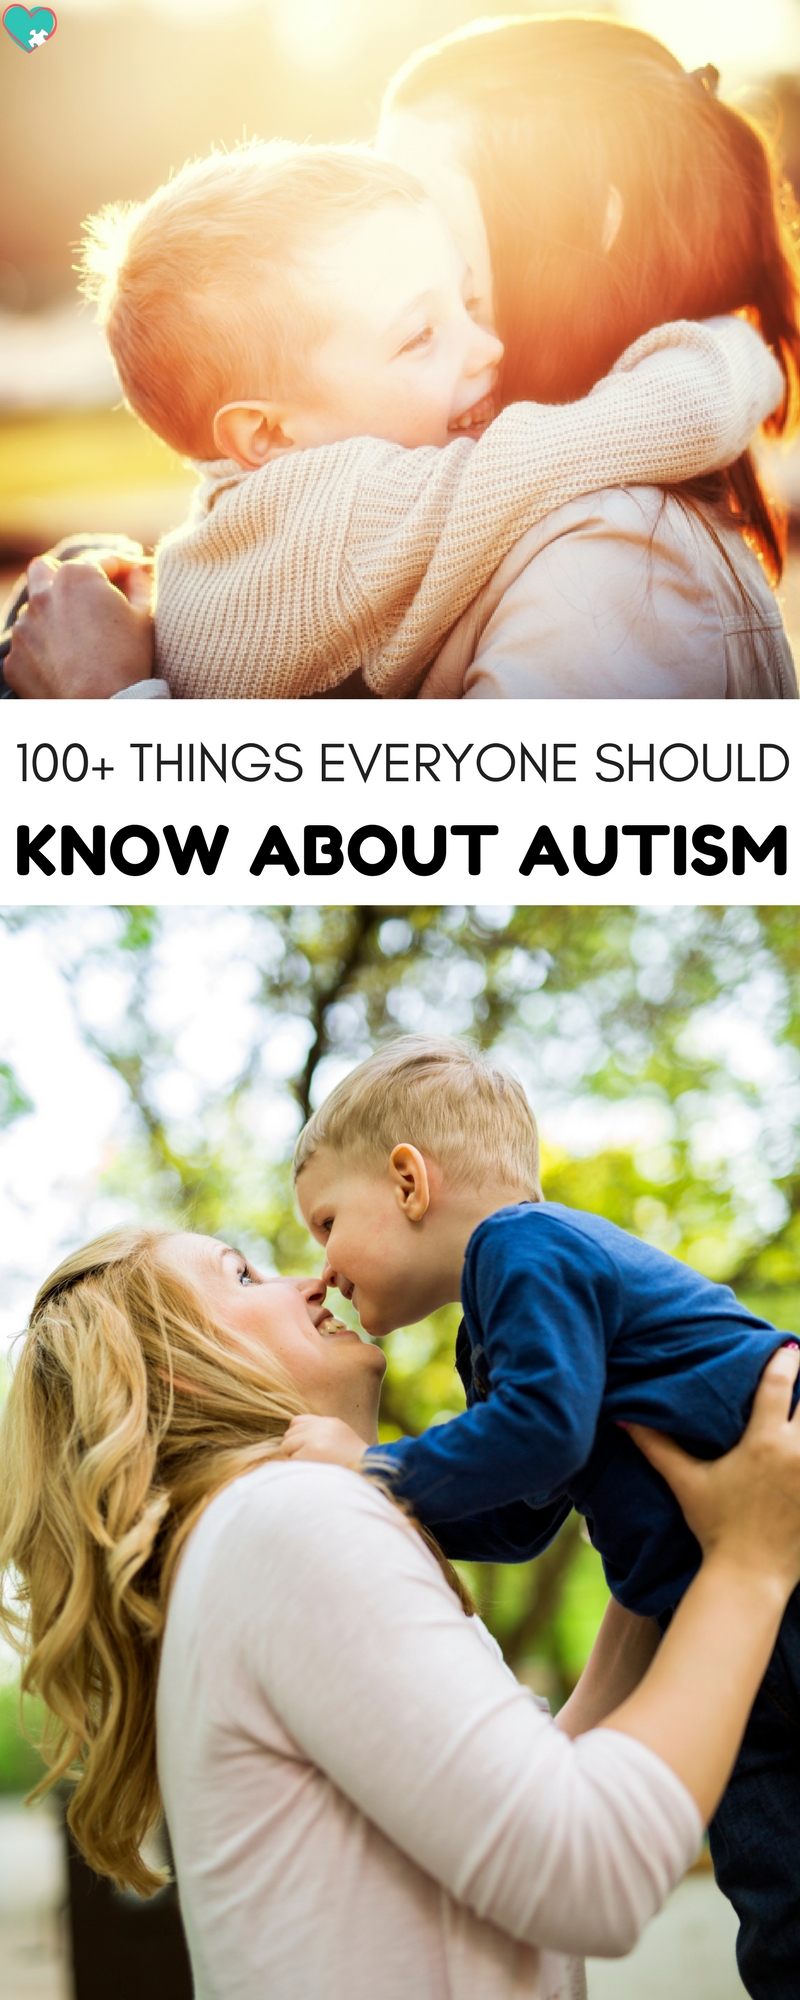 100+ Things to Know About Autism #autism #autistic #actuallyautistic #disability #parenting 